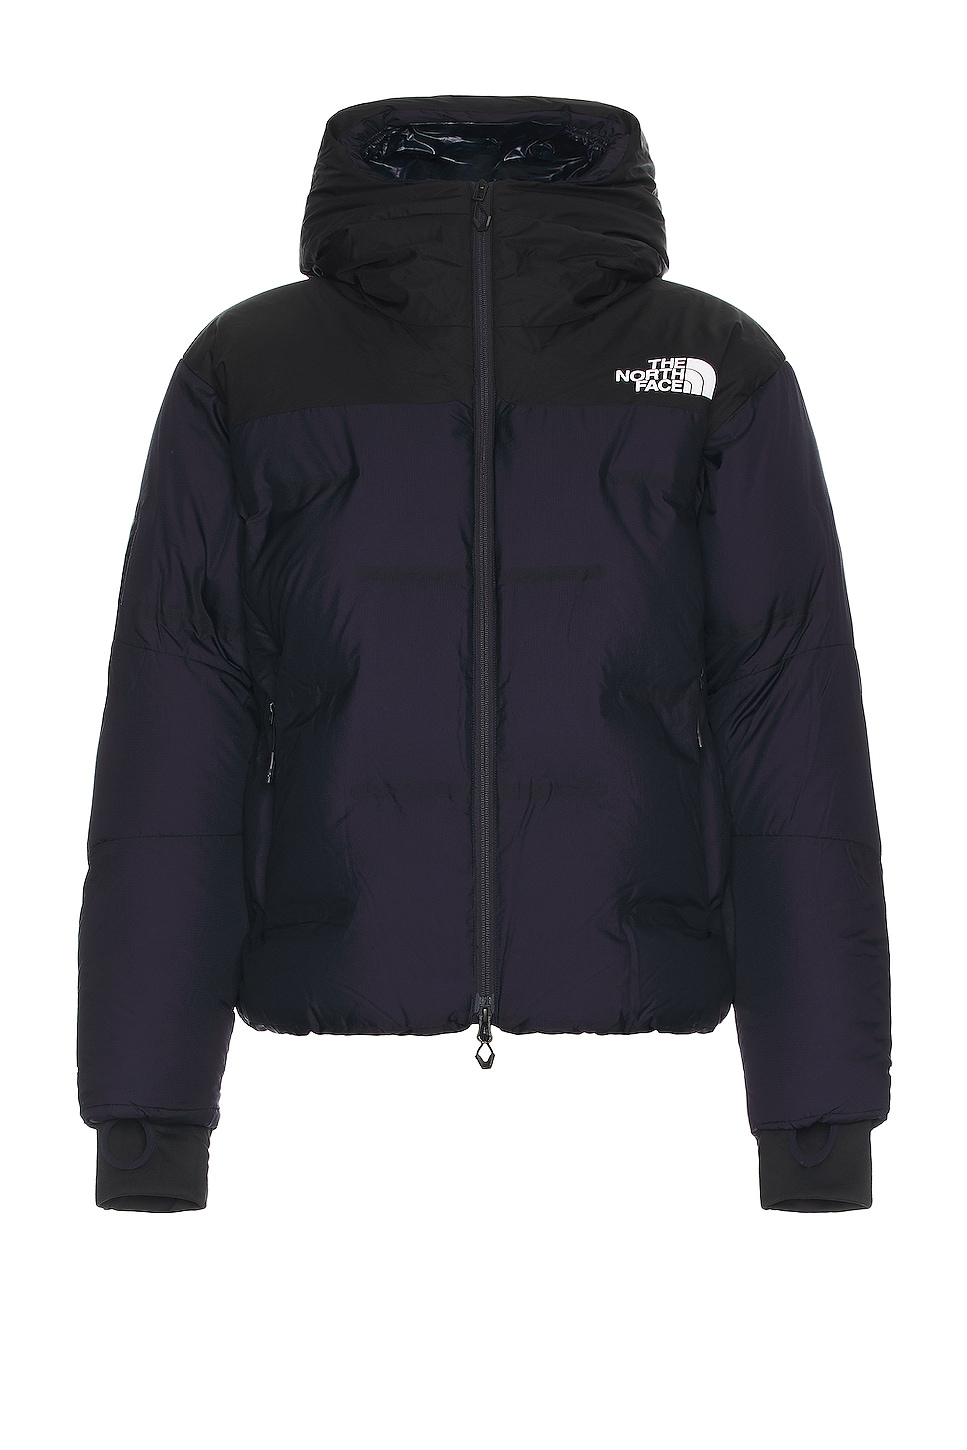 Image 1 of The North Face X Project U Cloud Down Nuptse Jacket in Tnf Black & Aviator Navy